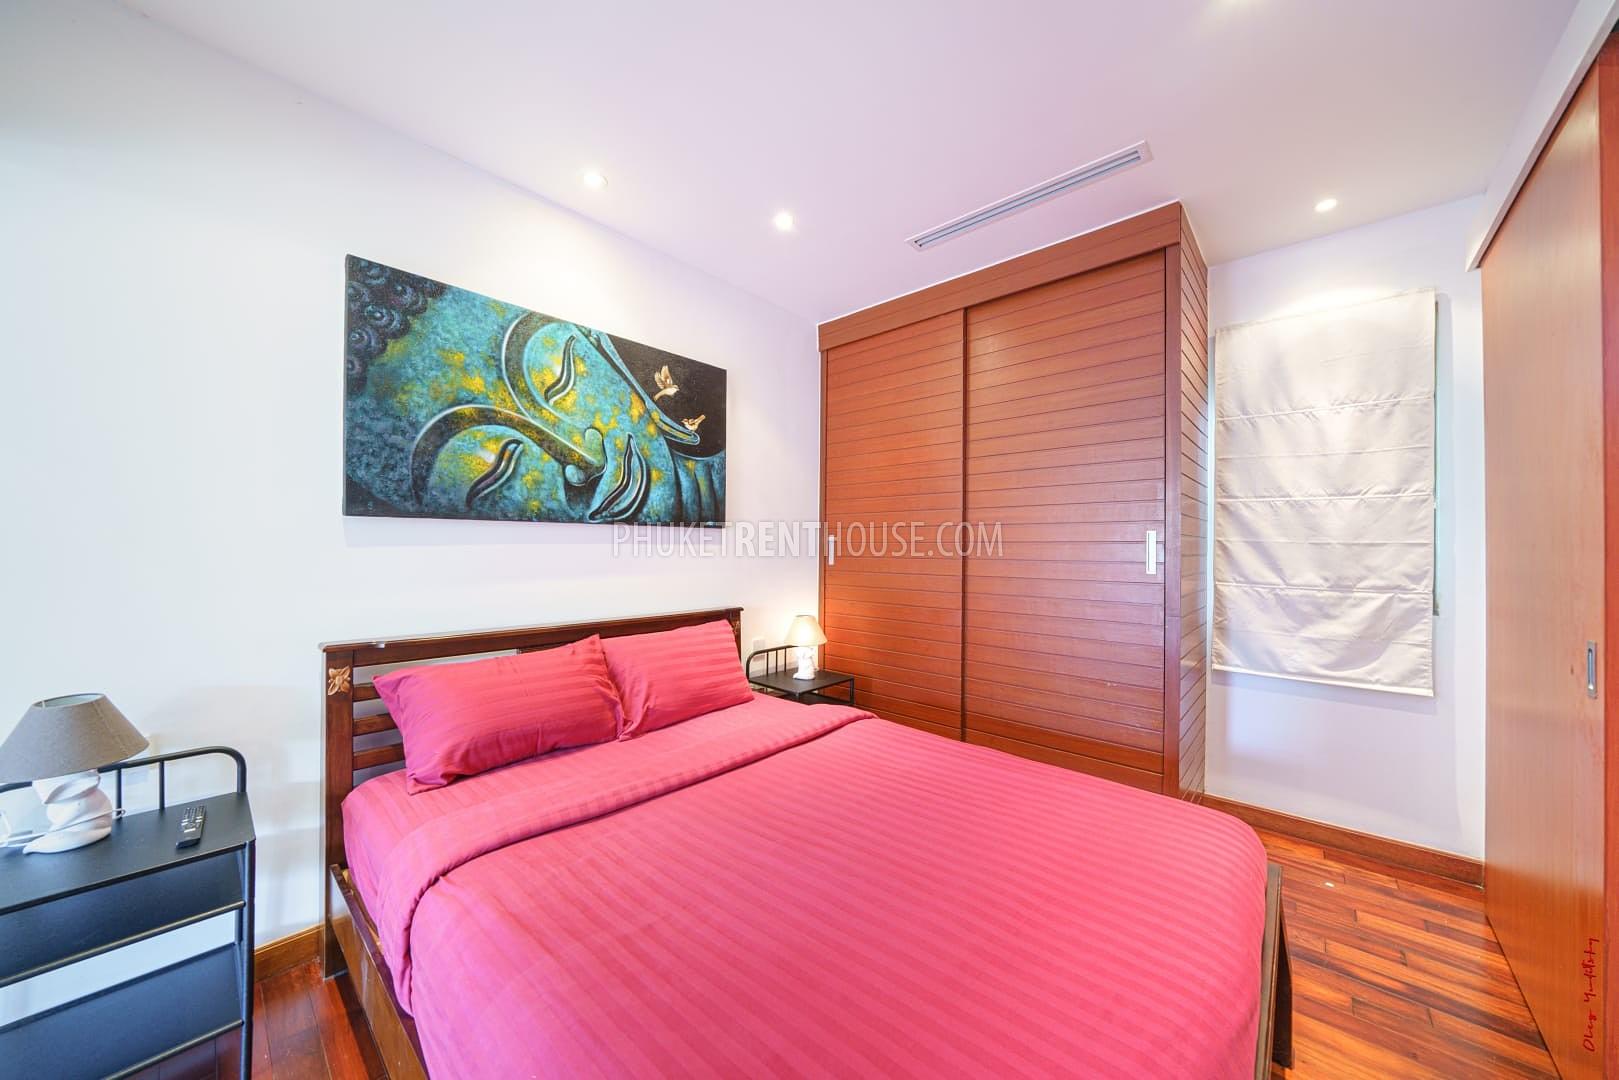 BAN21764: One bedroom villa with private pool on Bangtao beach. Photo #19